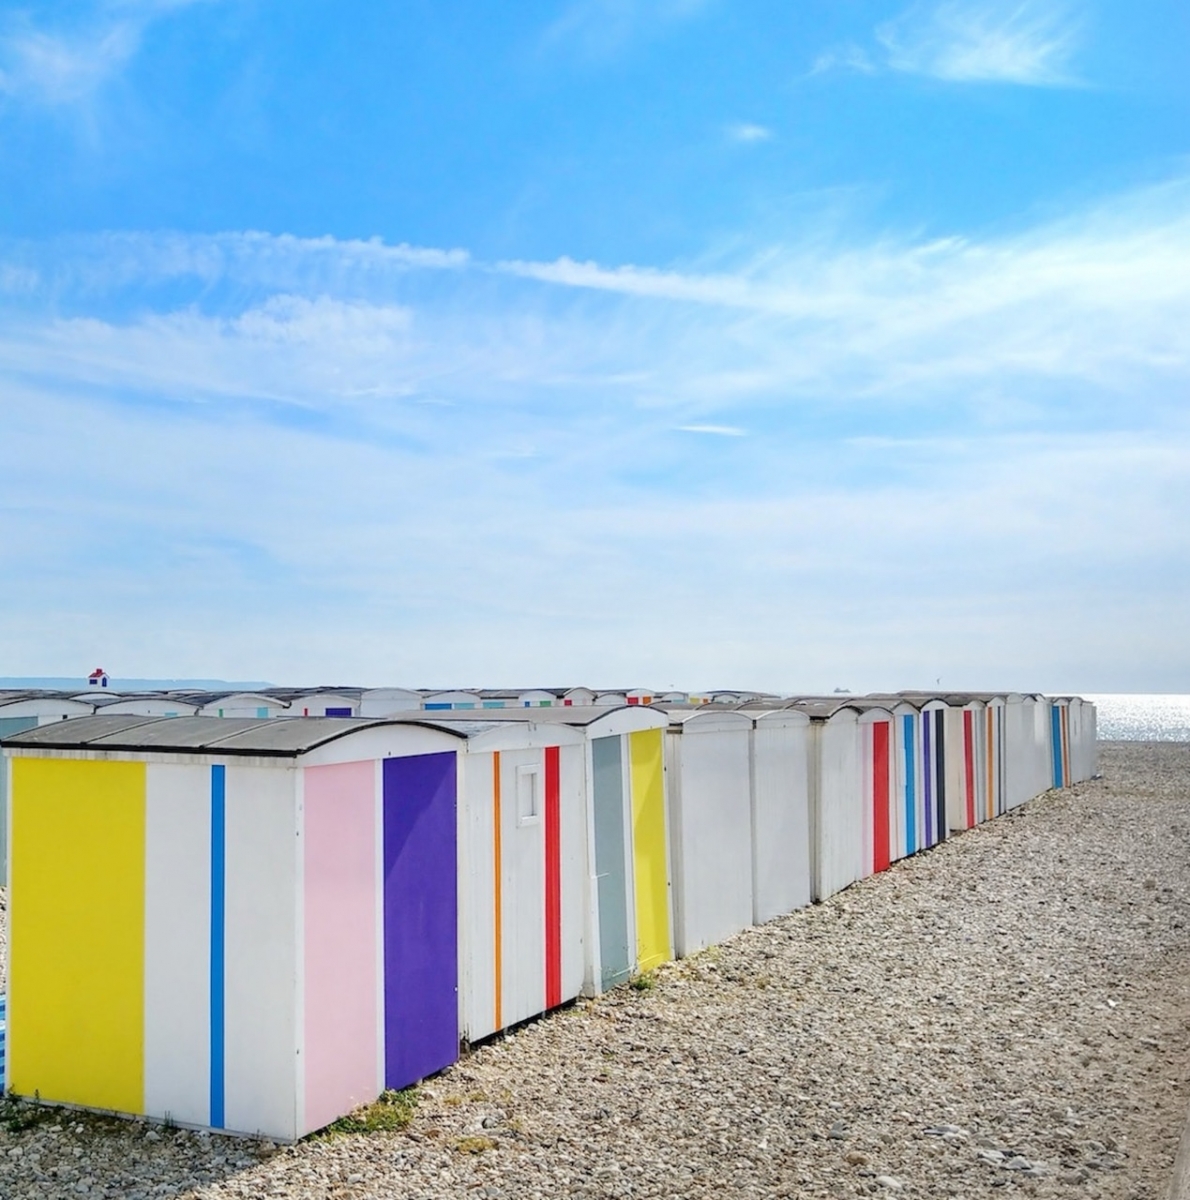 Small wooden cabins placed on the beach In Le Havre, Upper Normandy, France